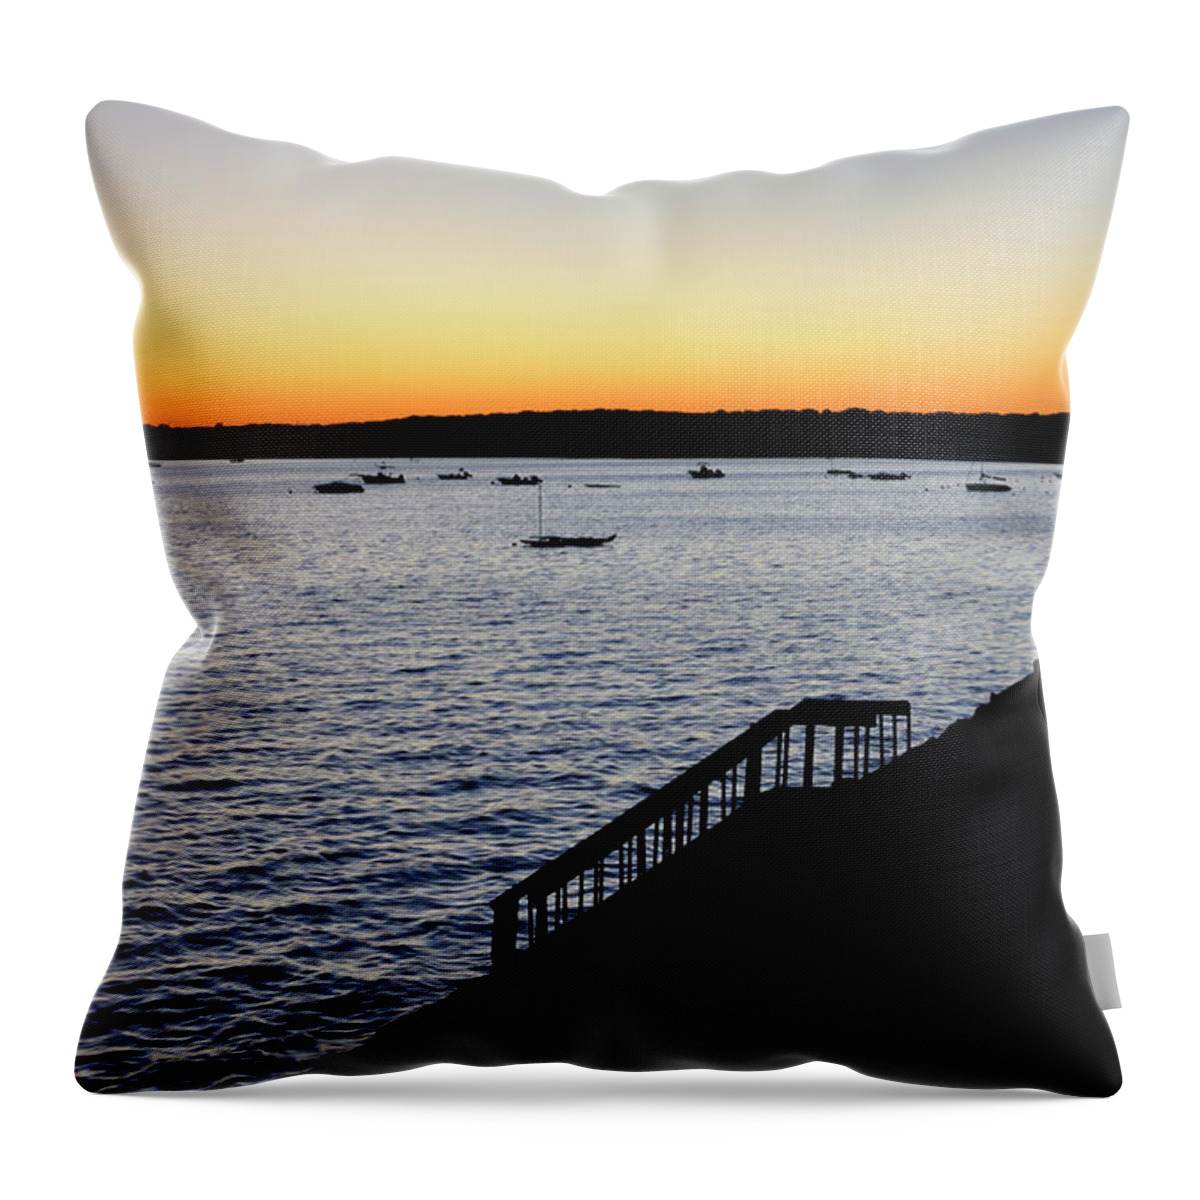 Cape Cod Throw Pillow featuring the photograph Lewis Bay Cape Cod Sunset by Luke Moore